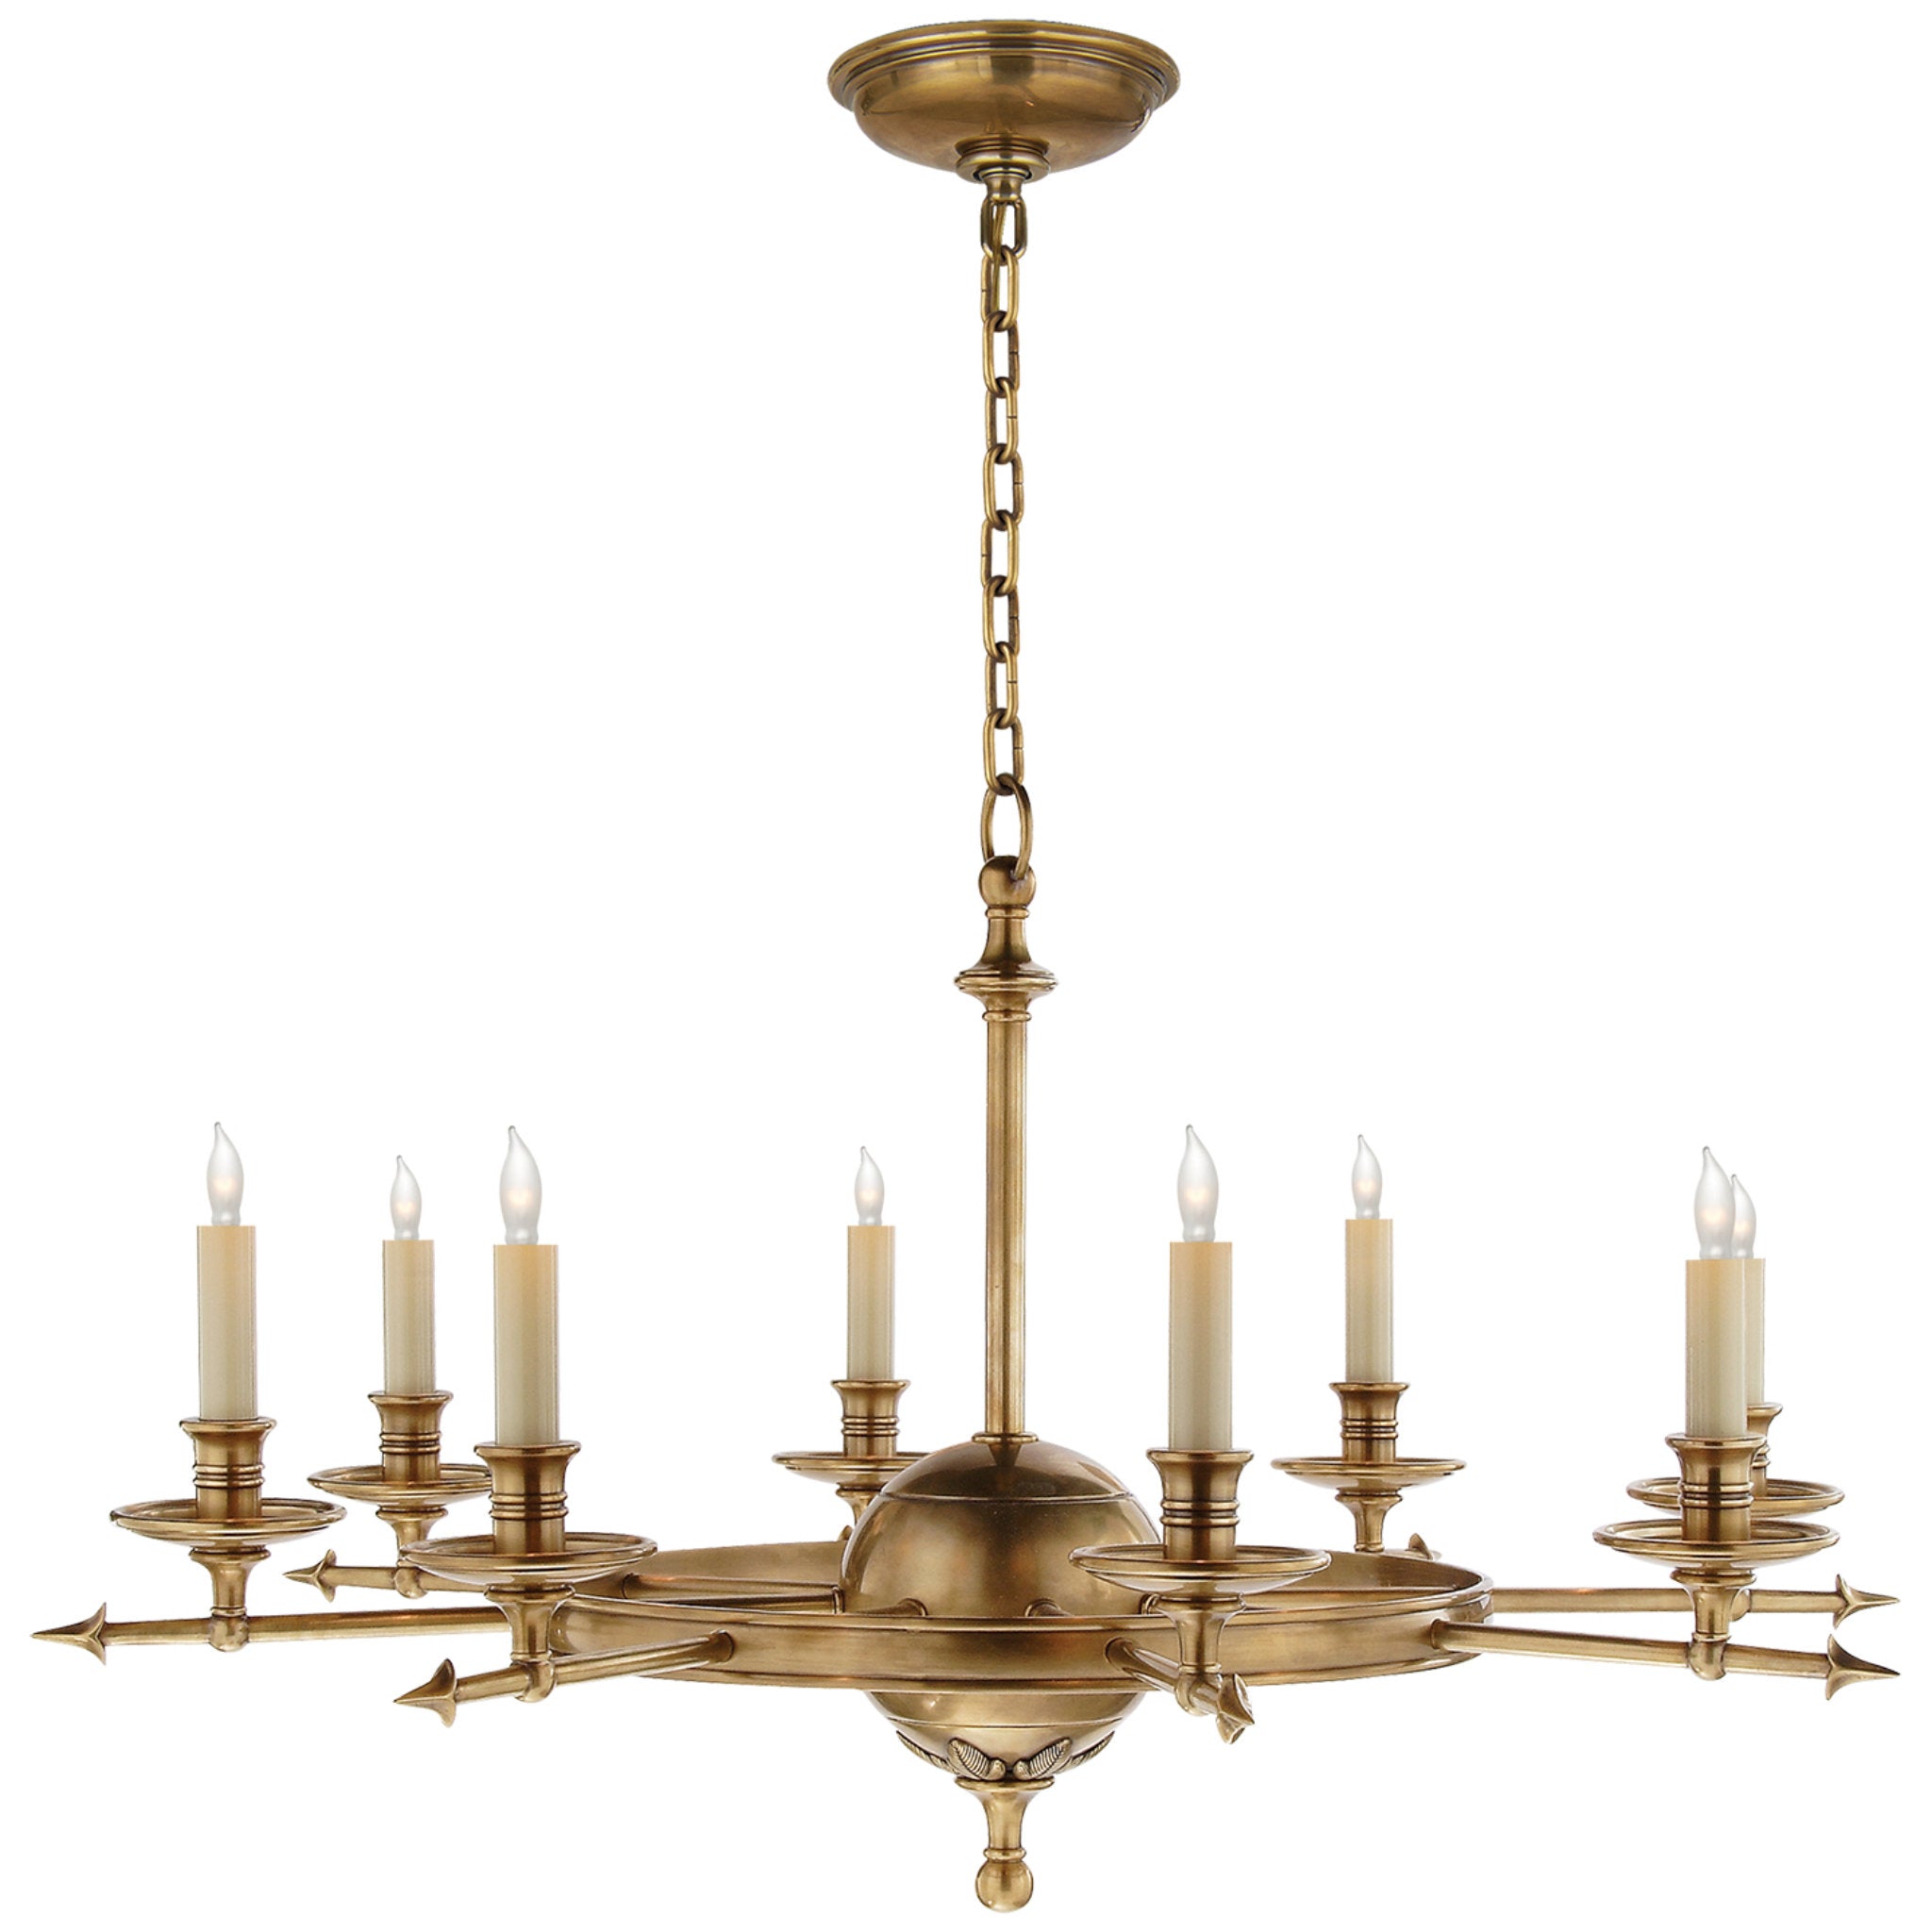 Chapman & Myers Leaf and Arrow Large Chandelier in Antique-Burnished B